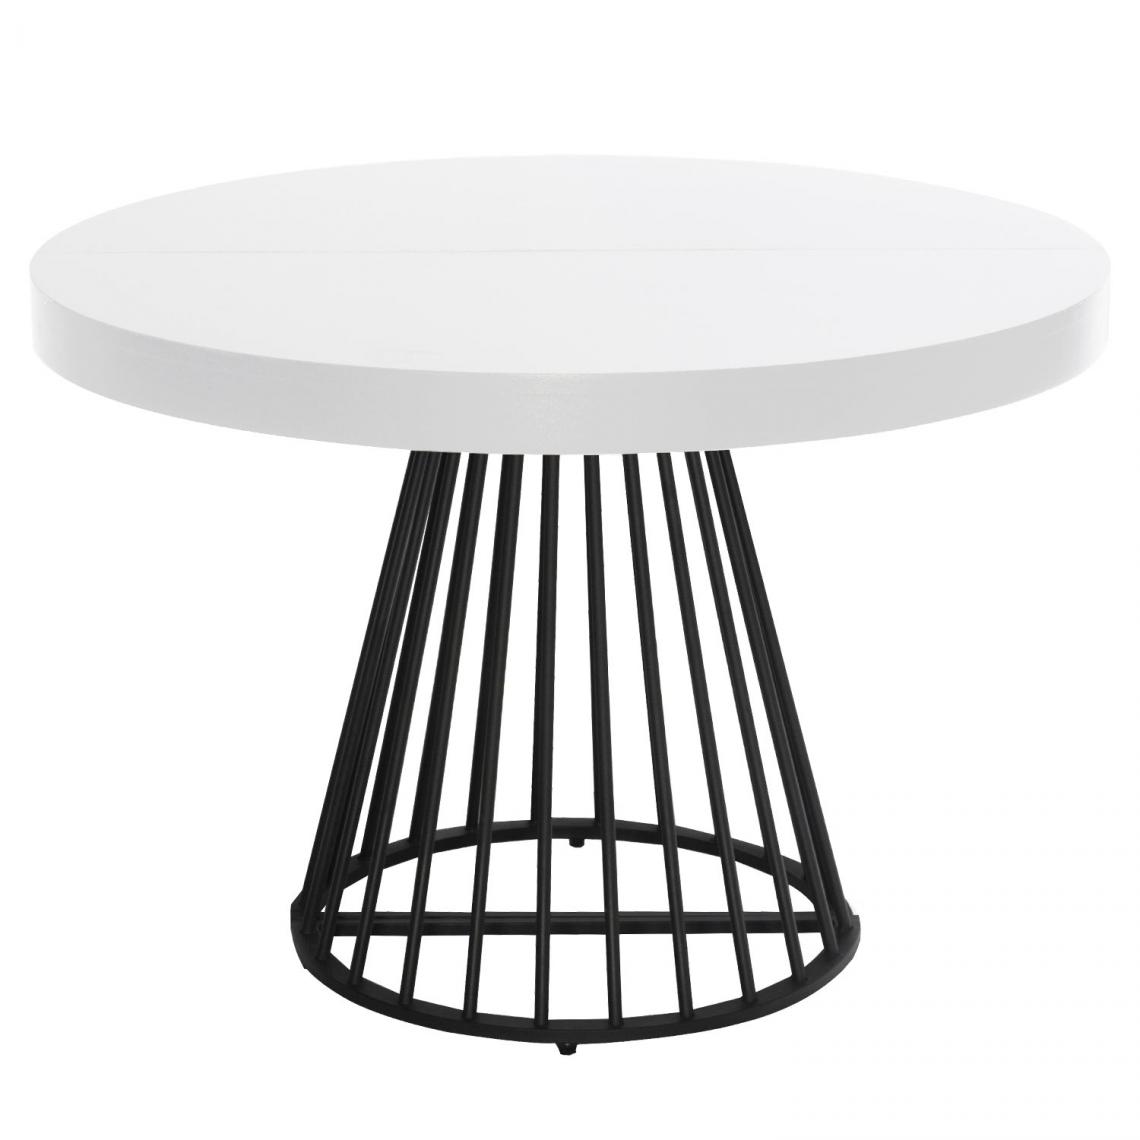 MENZZO - Table ronde extensible Grivery Blanc pieds Noir - Tables à manger